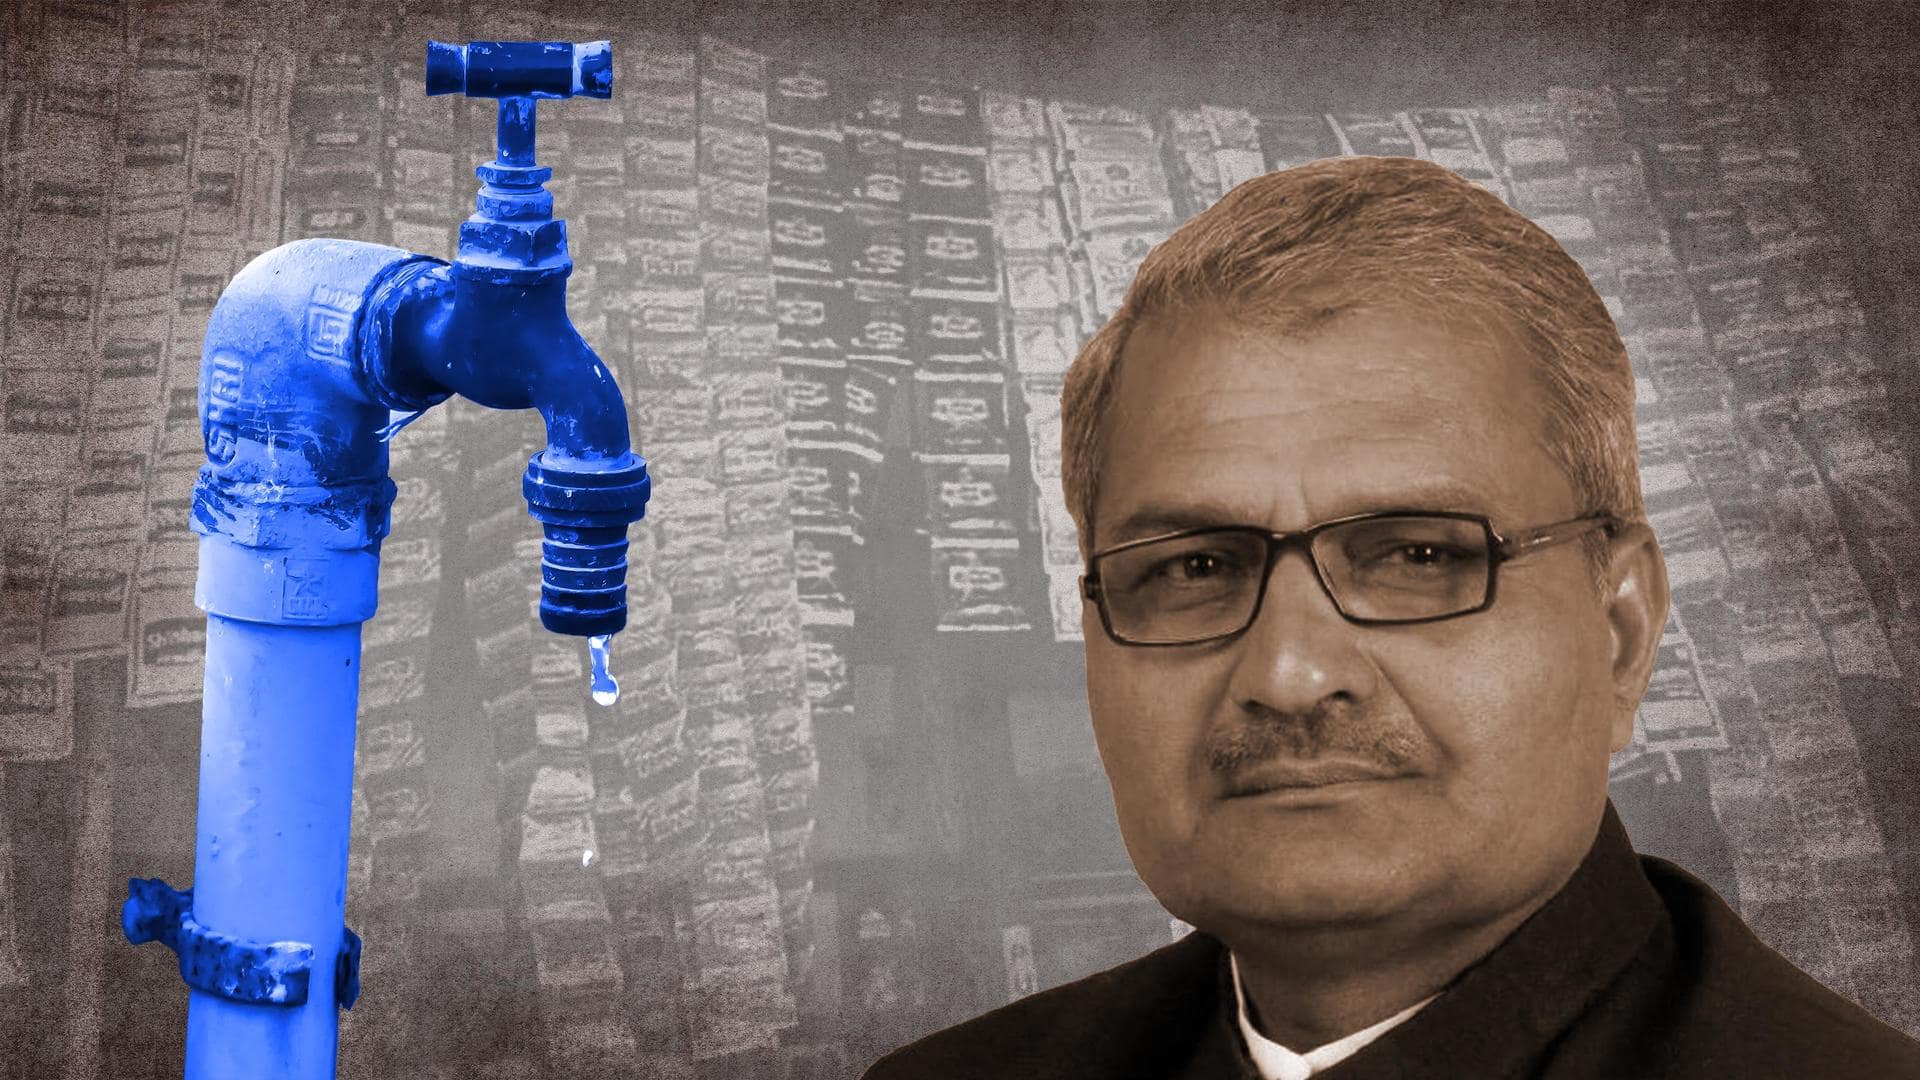 'Chew tobacco, drink alcohol': BJP MP's bizarre 'water conservation' remarks